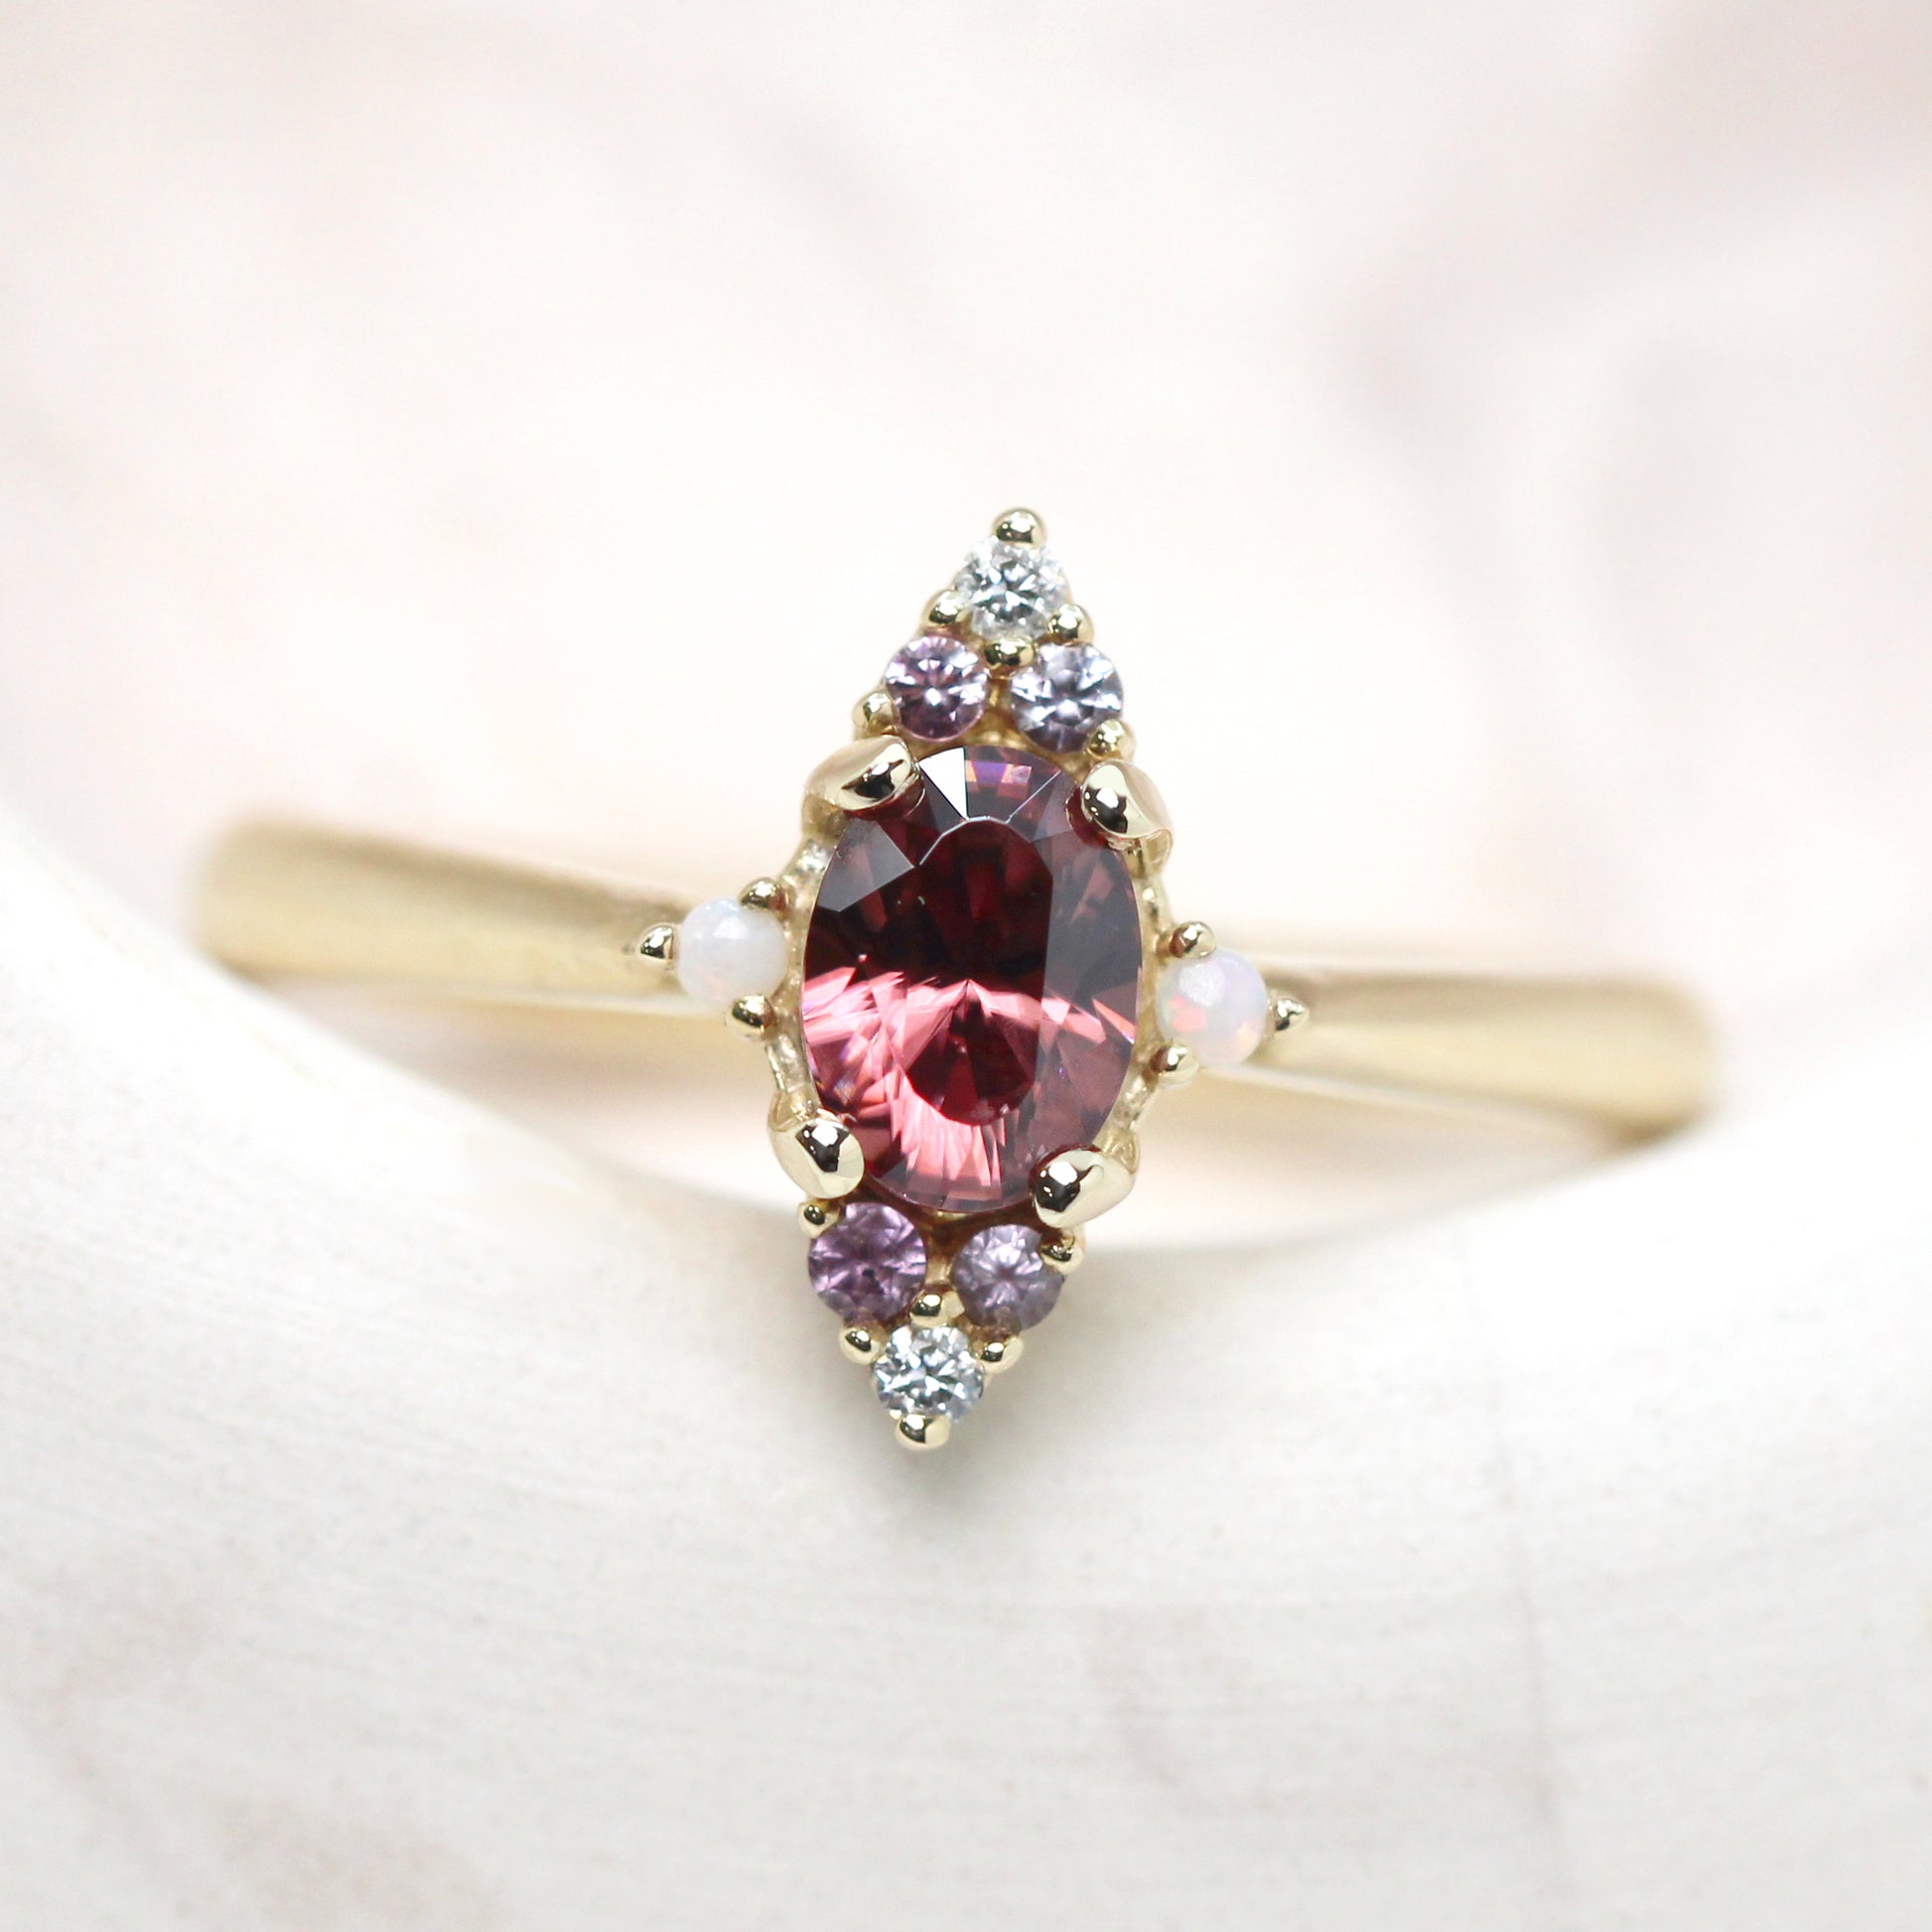 Emery Ring with a 0.98 Carat Oval Zircon and White Diamond, Purple Sapphire & Opal Accents in 14k Yellow Gold - Ready to Size and Ship - Midwinter Co. Alternative Bridal Rings and Modern Fine Jewelry